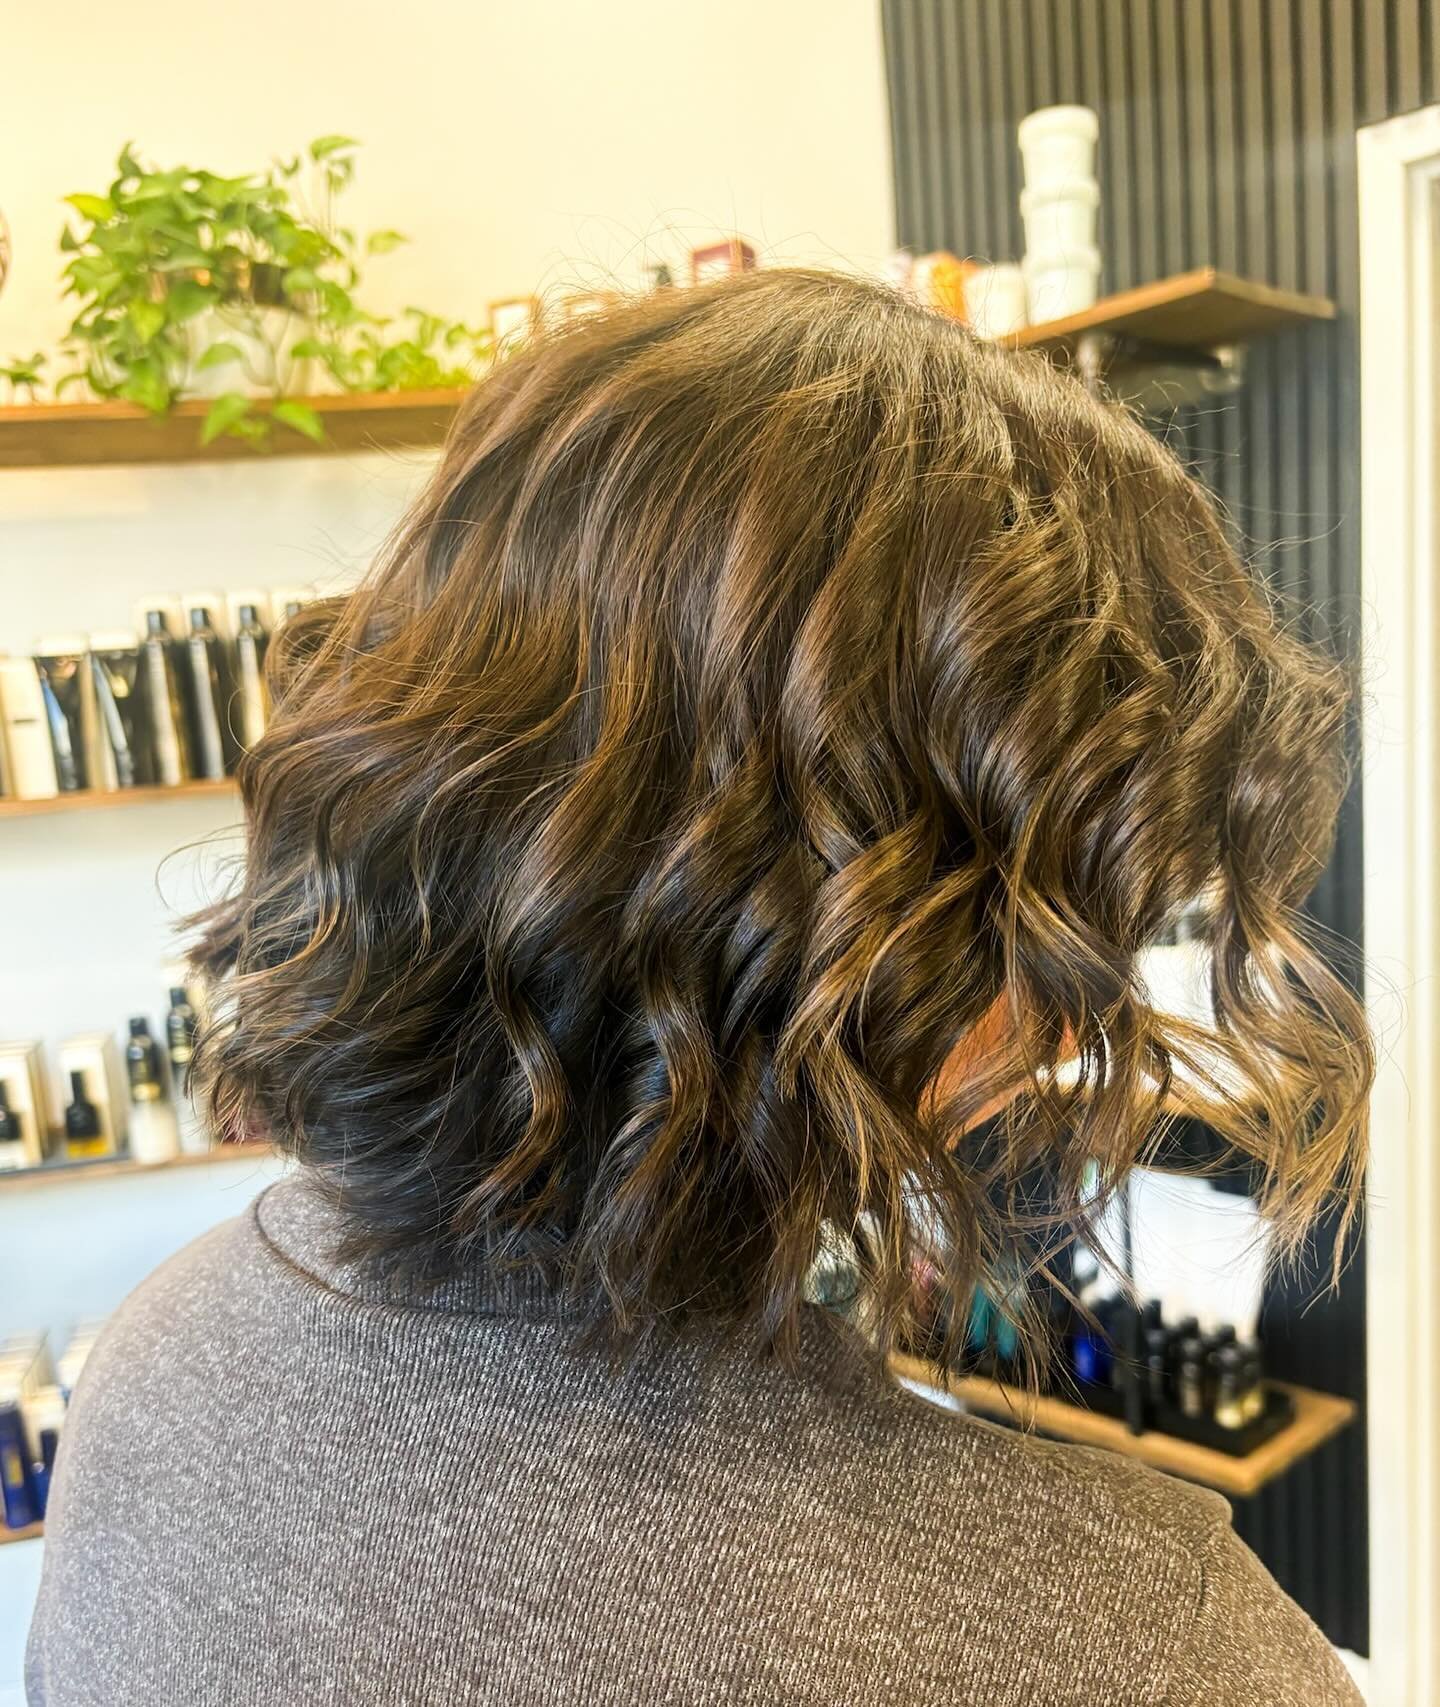 Big chop with flat iron curls 😍 by Kat @hair.bykat13 !
Swipe left for the before!

📱 Call + 1 (206) 485-7324 to book your appointment. 
📍 1222 E Madison St. Suite E, Seattle, WA 98122 
💻 www.sugarandshearsseattle.com [ Link in bio ]